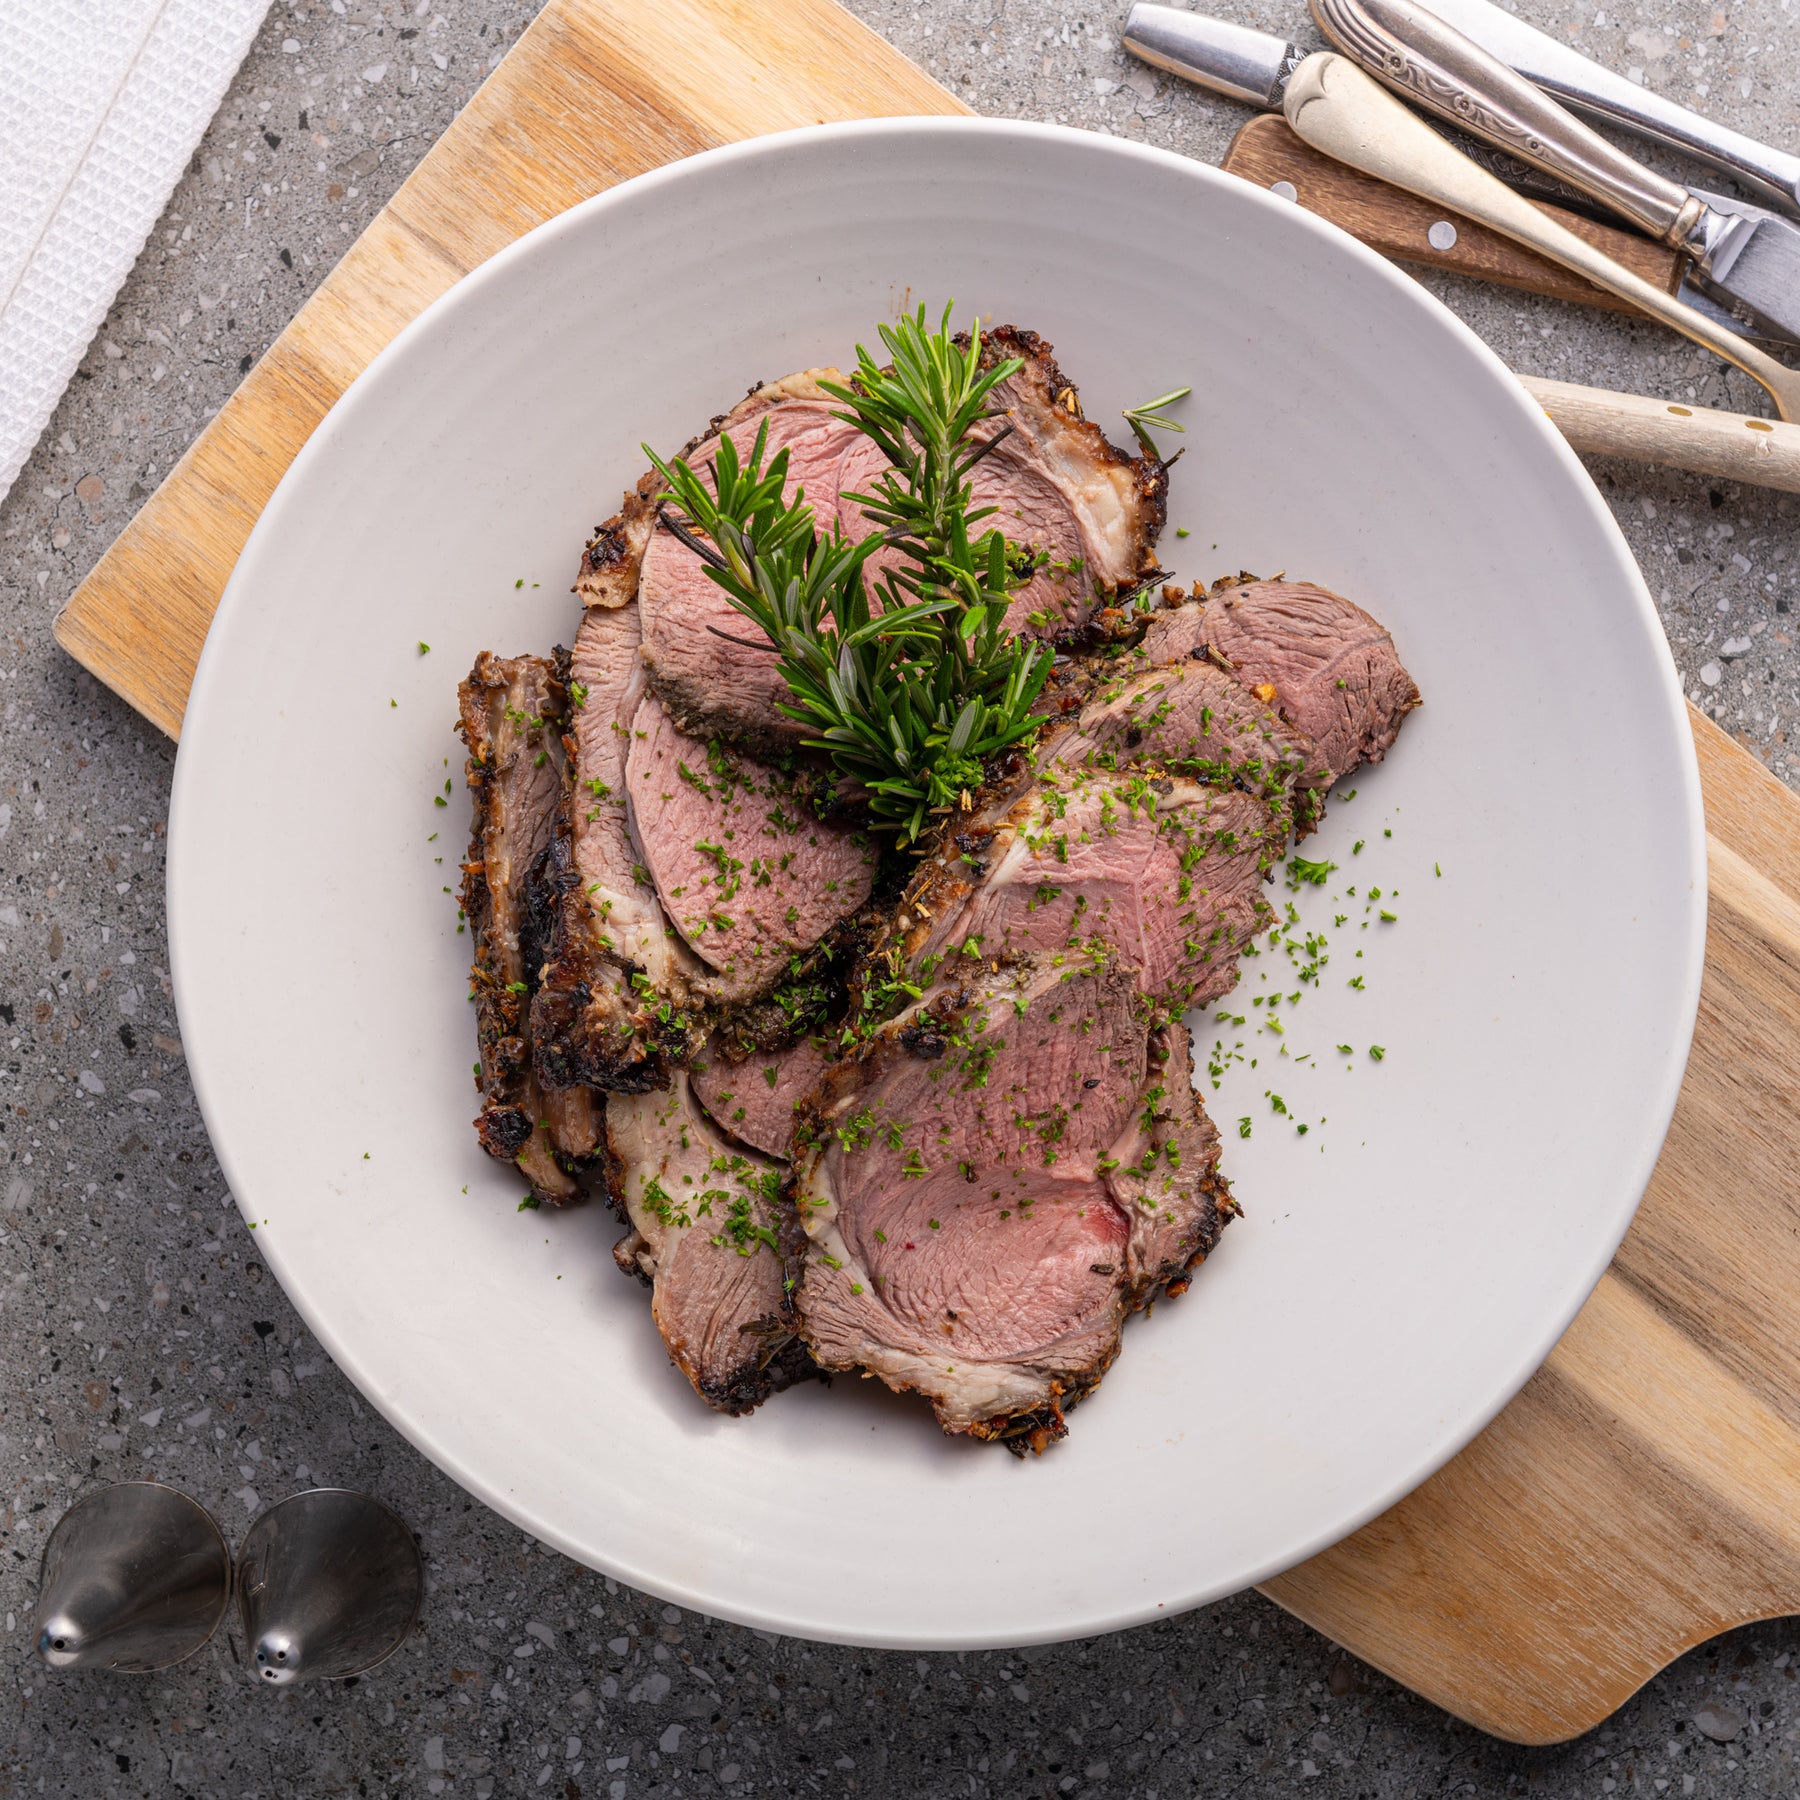 meal kit Marinated roast lamb shoulder made by fitfood nz